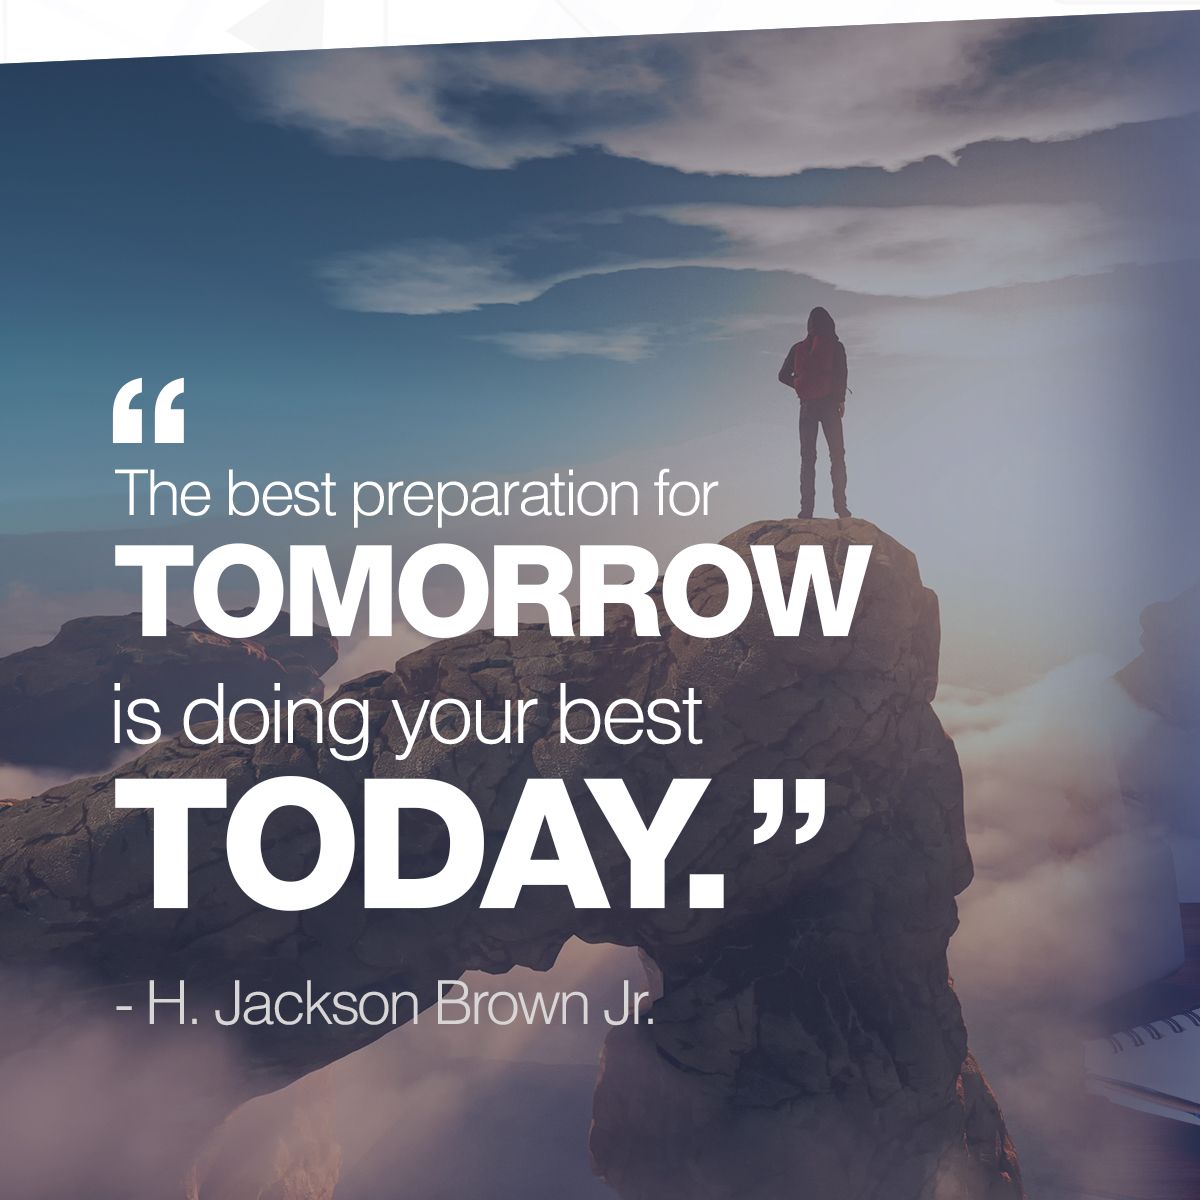 The best preparation for tomorrow is doig your best today.